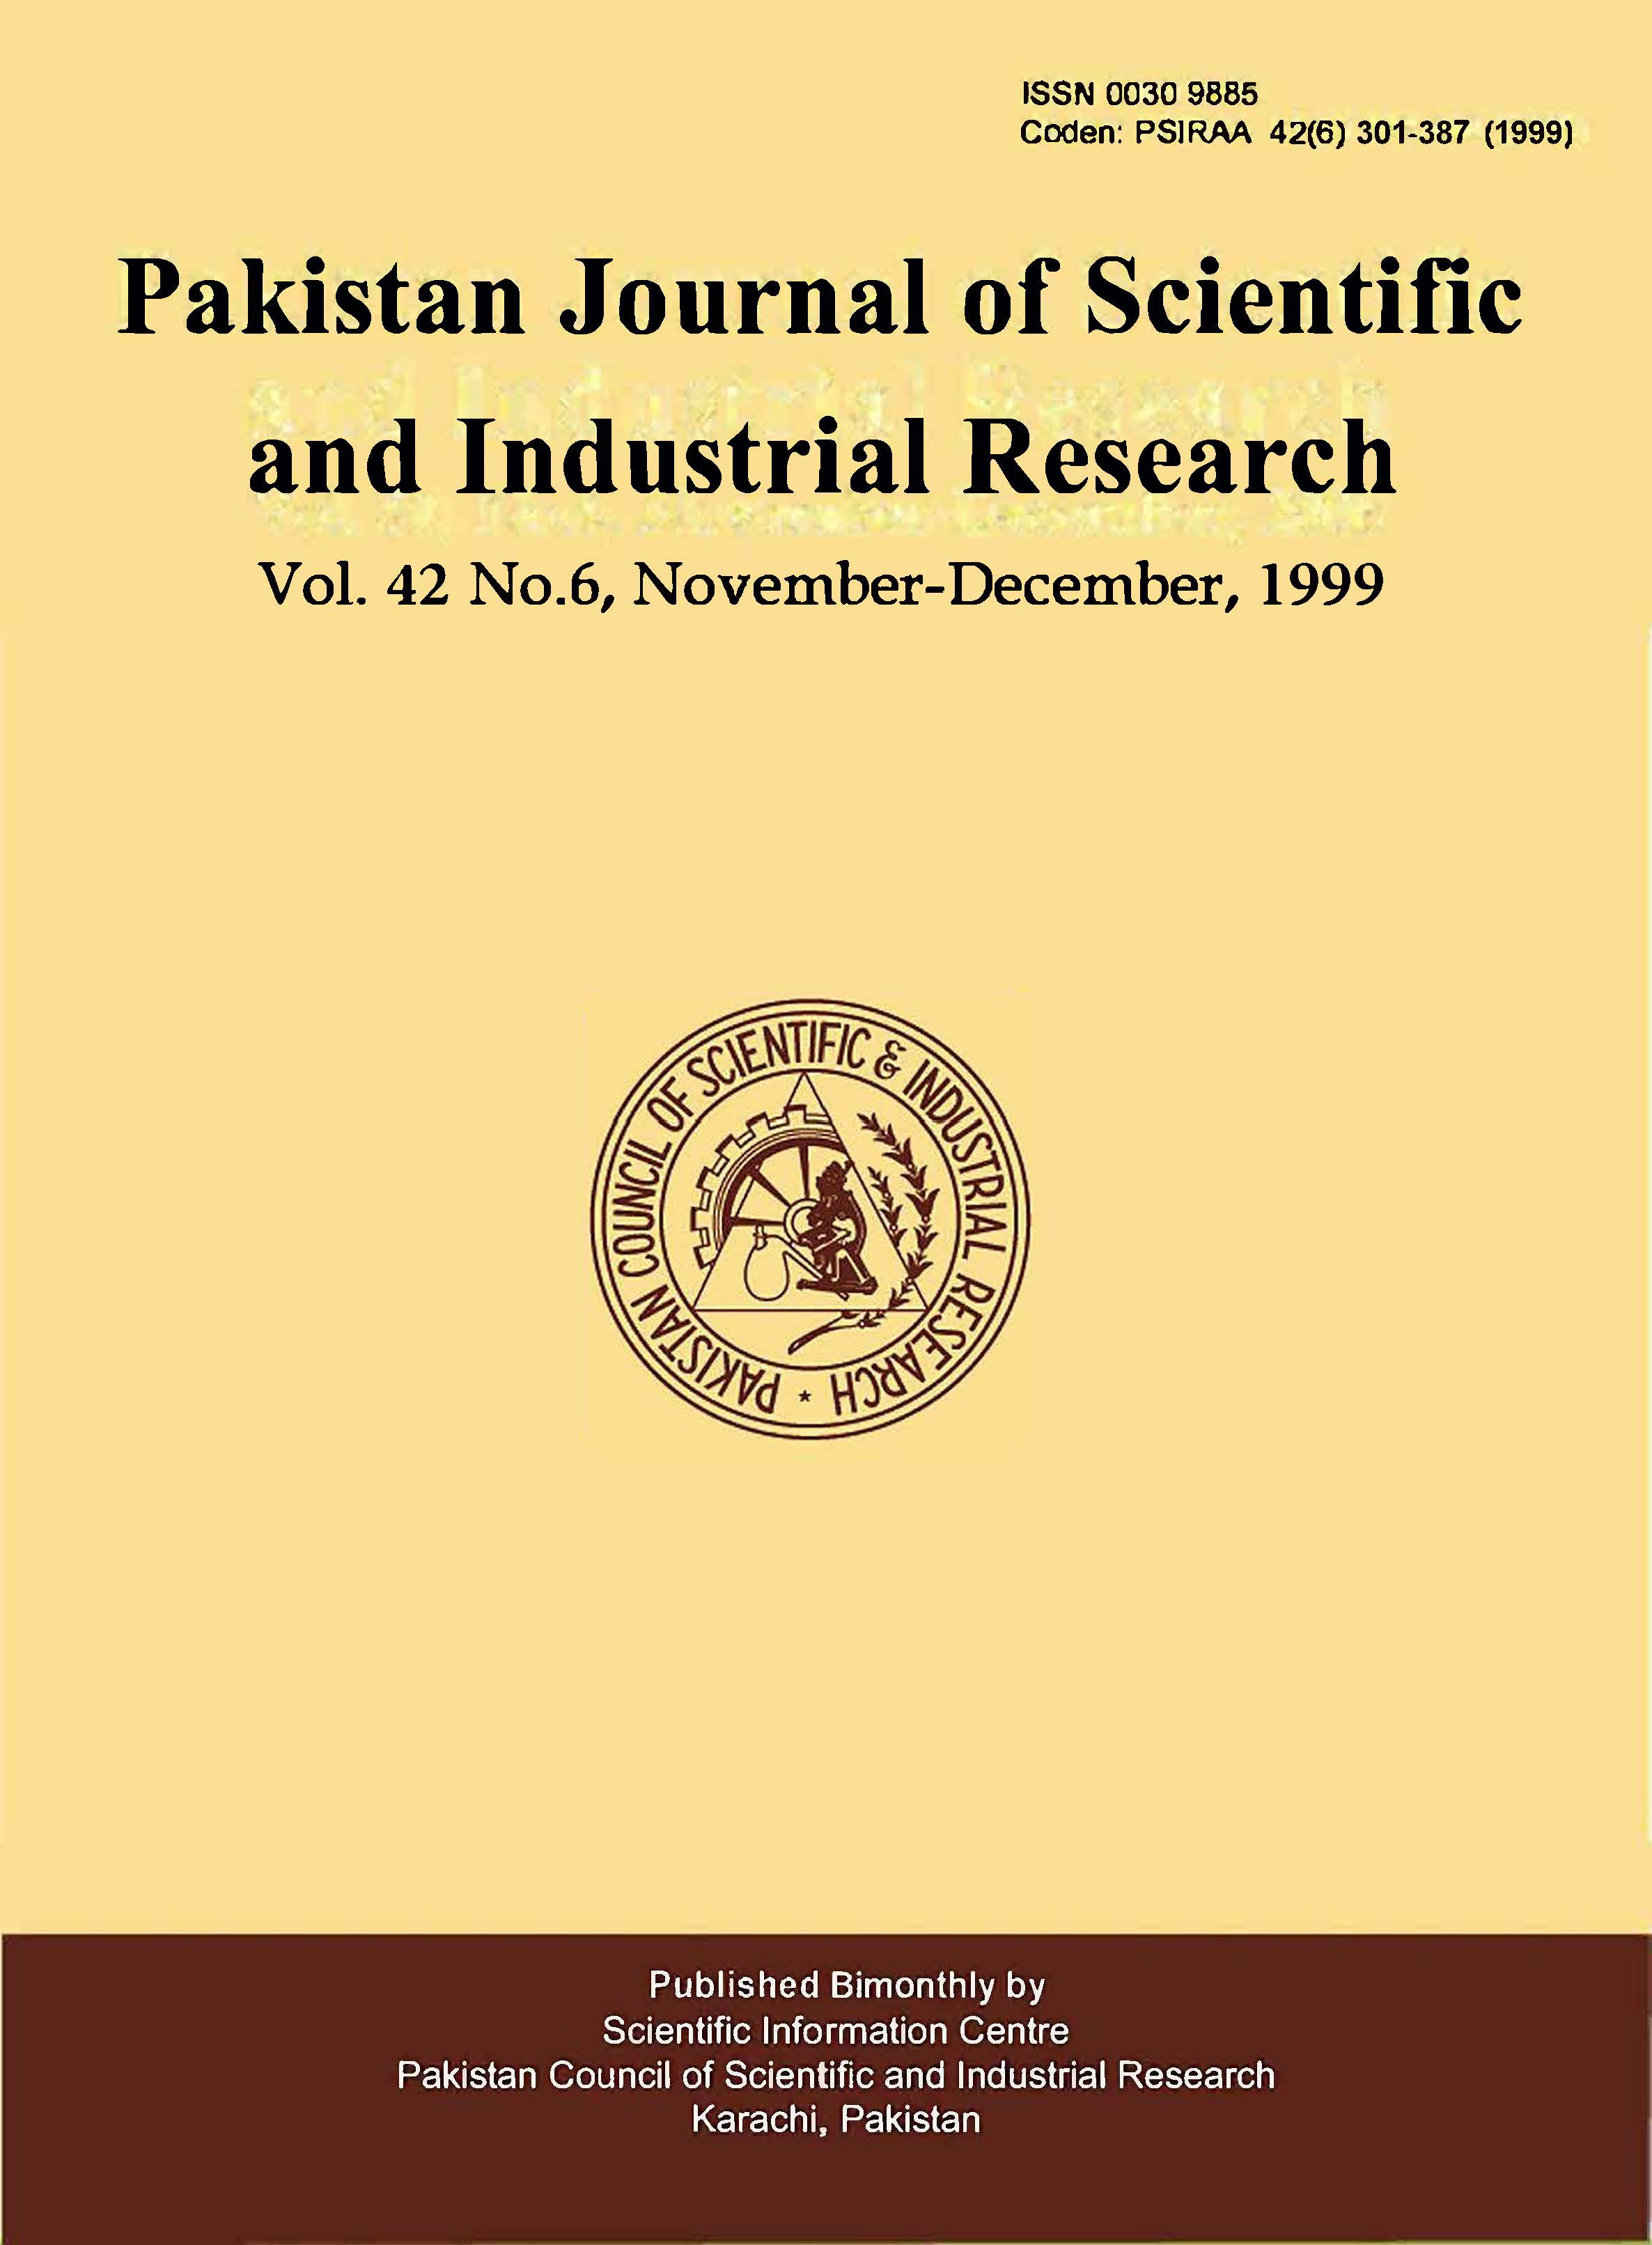 					View Vol. 42 No. 6 (1999): Pakistan Journal of Scientific and Industrial Research
				